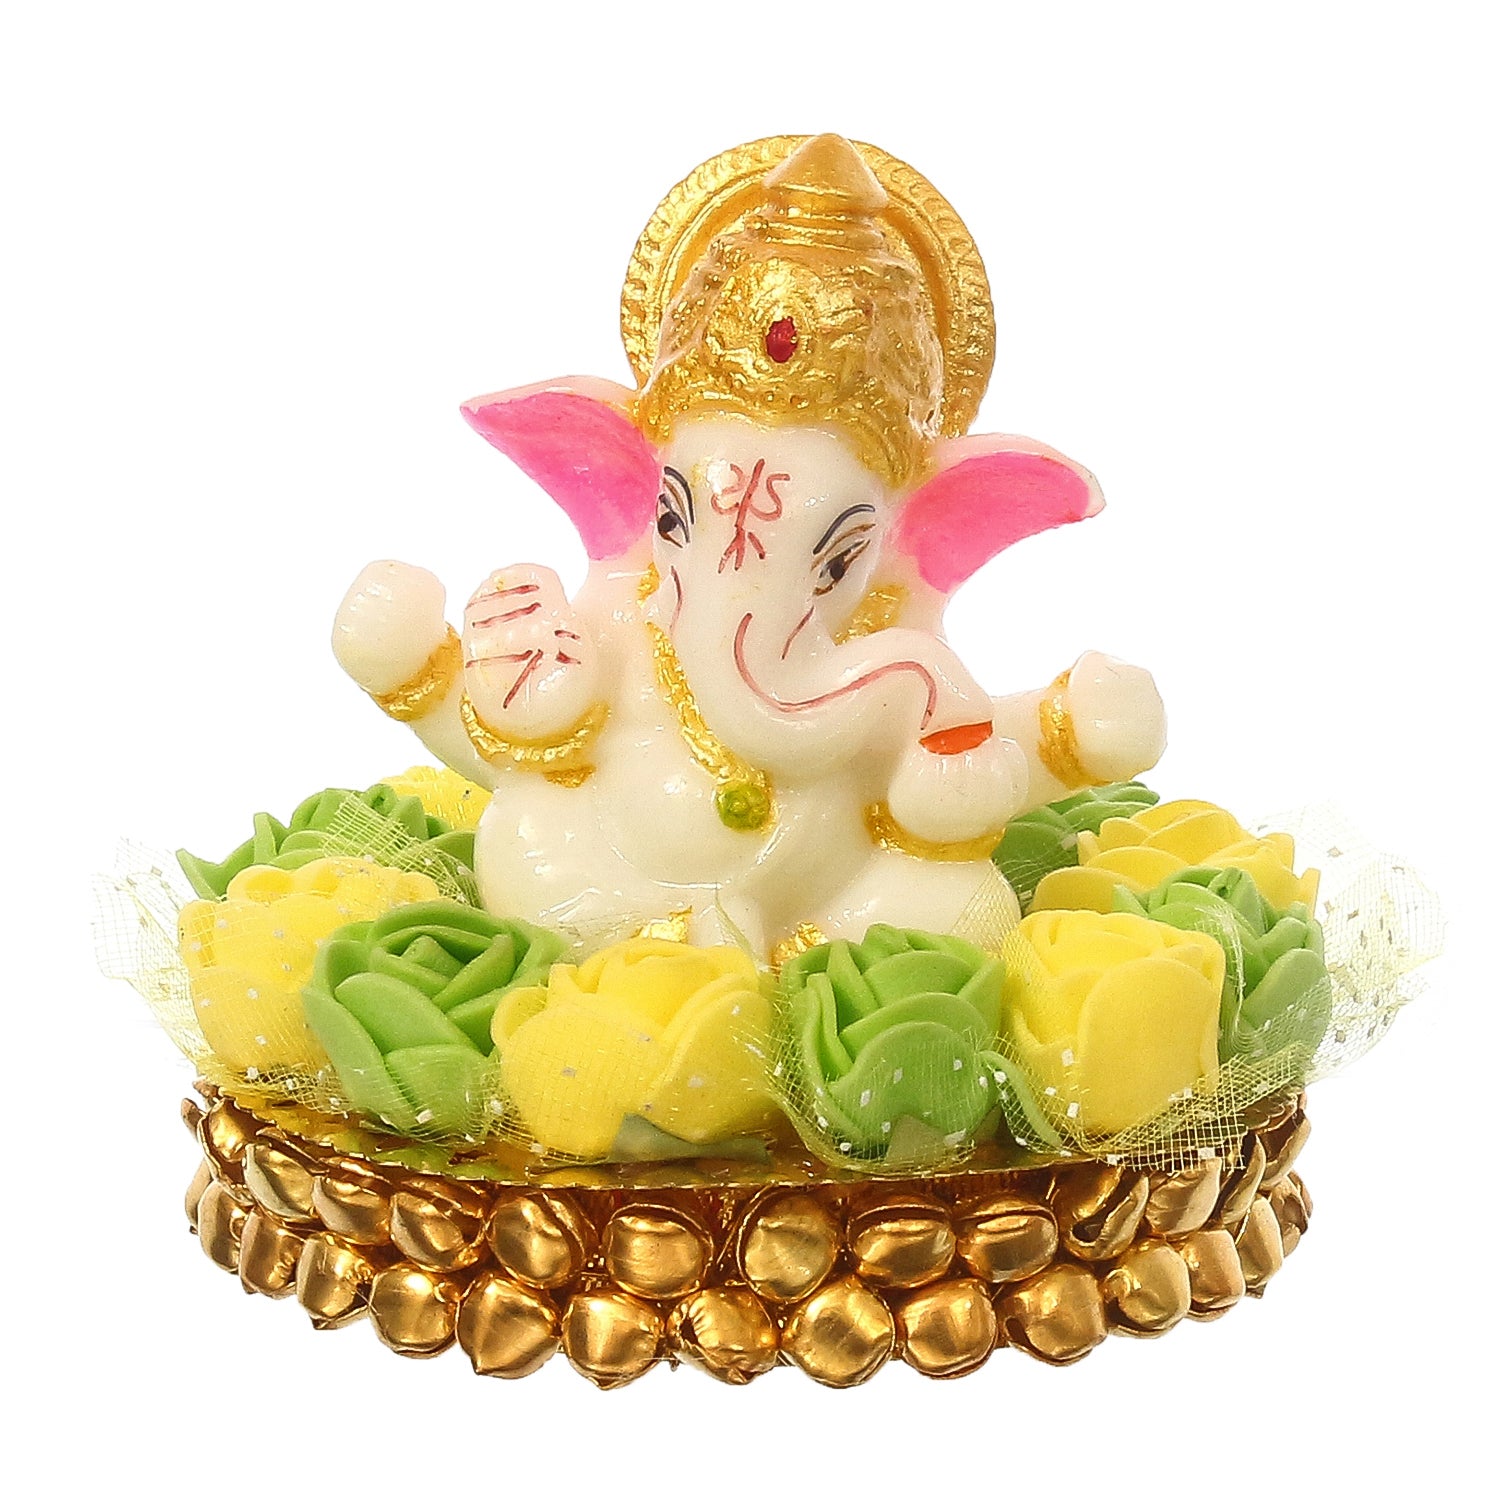 Lord Ganesha Idol On Decorative Handcrafted Green And Yellow Flowers Plate 2